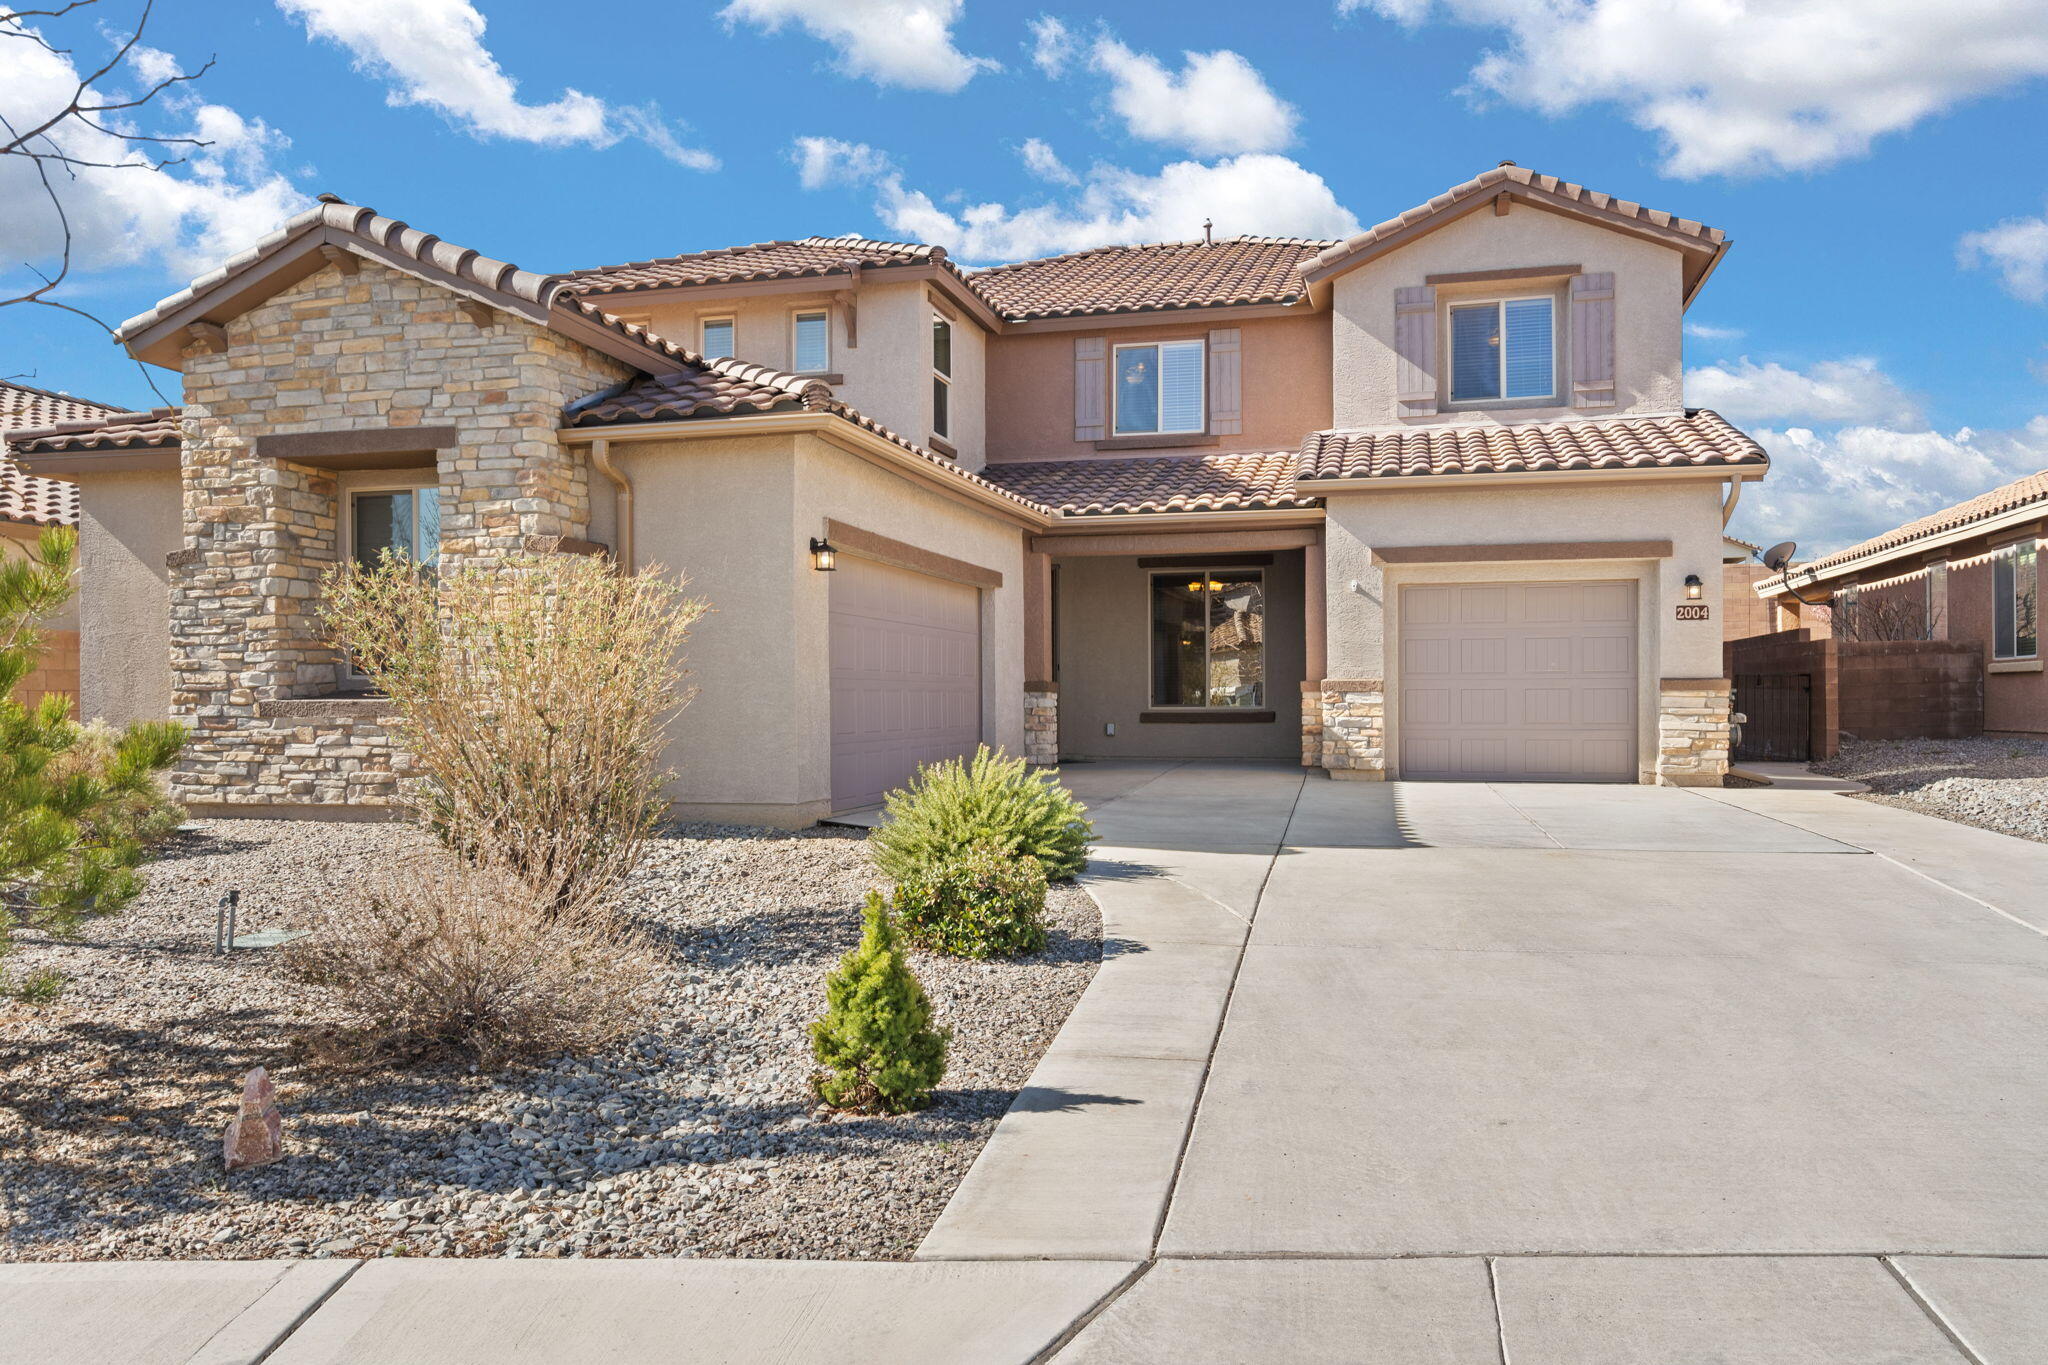 This Pulte Starwood in Mirehaven shines! Featuring 4 bedrooms, 4 baths, an office + a large loft & Pulte Planning Center.  Fantastic floor plan with 20 ft vaulted ceilings, spindle stair railing & fireplace highlighting the living space. Open concept kitchen w/ stainless steel appliances, upgraded cabinetry & butler's pantry. Beautiful porcelain tile flows through the first floor. Downstairs bedroom with ensuite walk in shower for guests, teens or in-laws.  Primary bedroom features a large balcony & large walk-in tile shower. Beautifully landscaped backyard with covered patio, tranquil water feature, rain barrels & bubble drip system to all the greenery. Gutter system, security system, 3 car garage, refrigerated air & tankless water heater. Neighborhood park just around the corner!